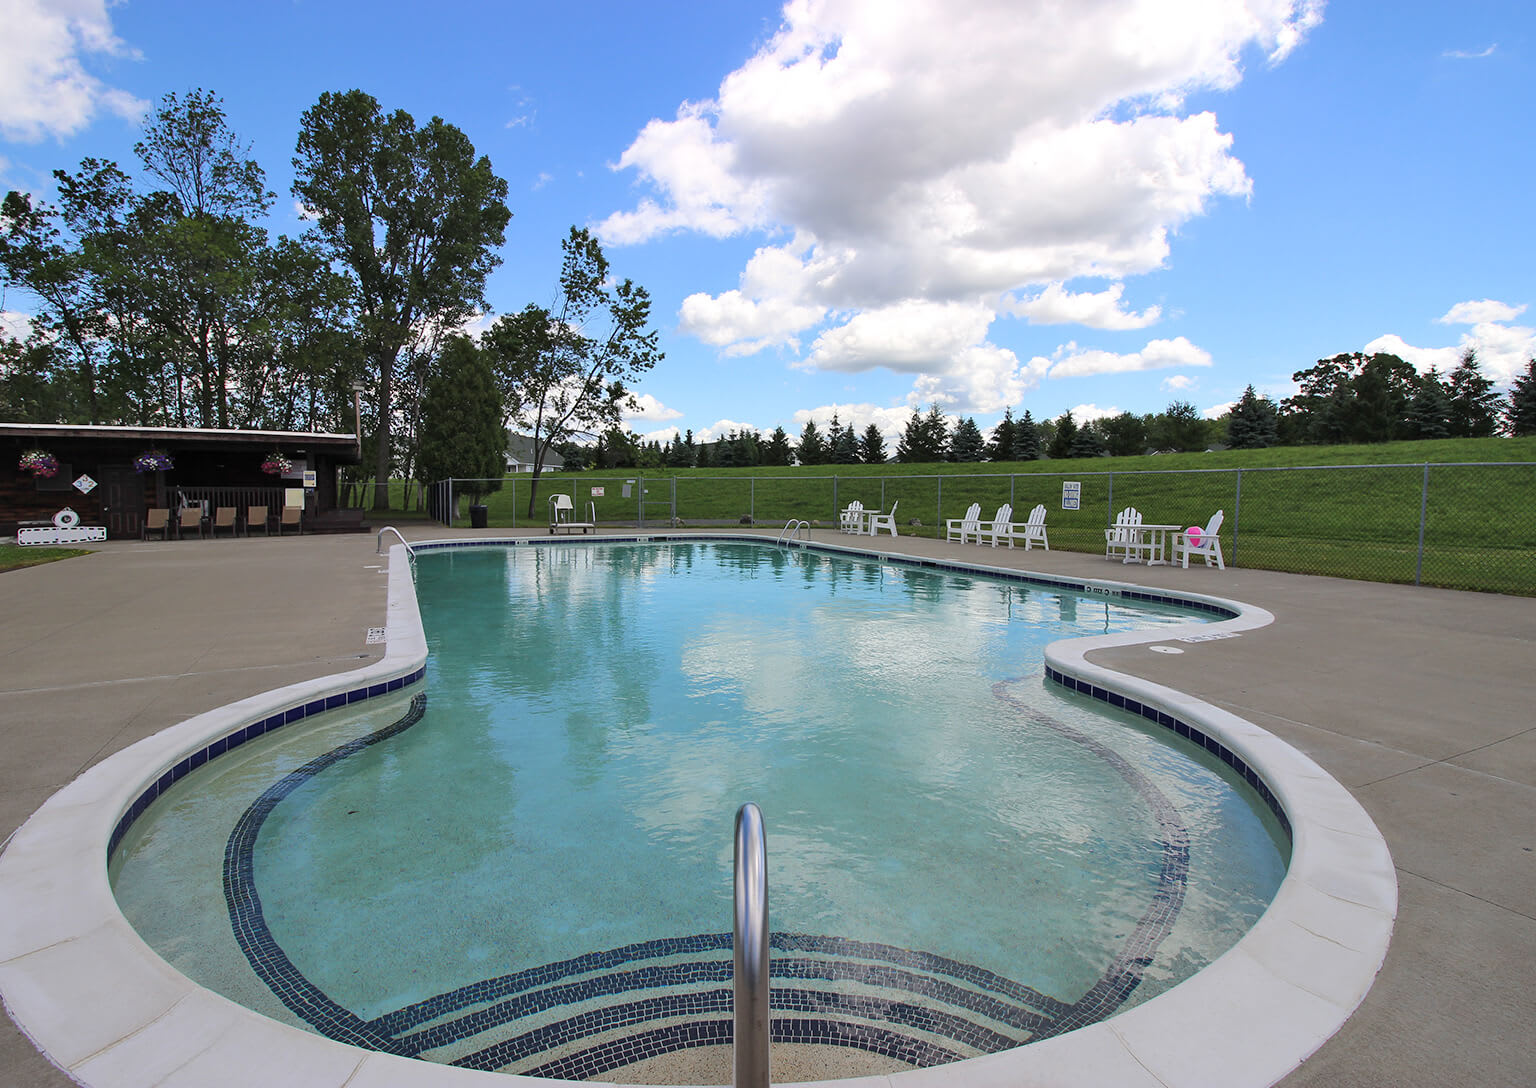 Inviting pool on a nice day at Lake Shore Park Apartments in Watervliet, New York